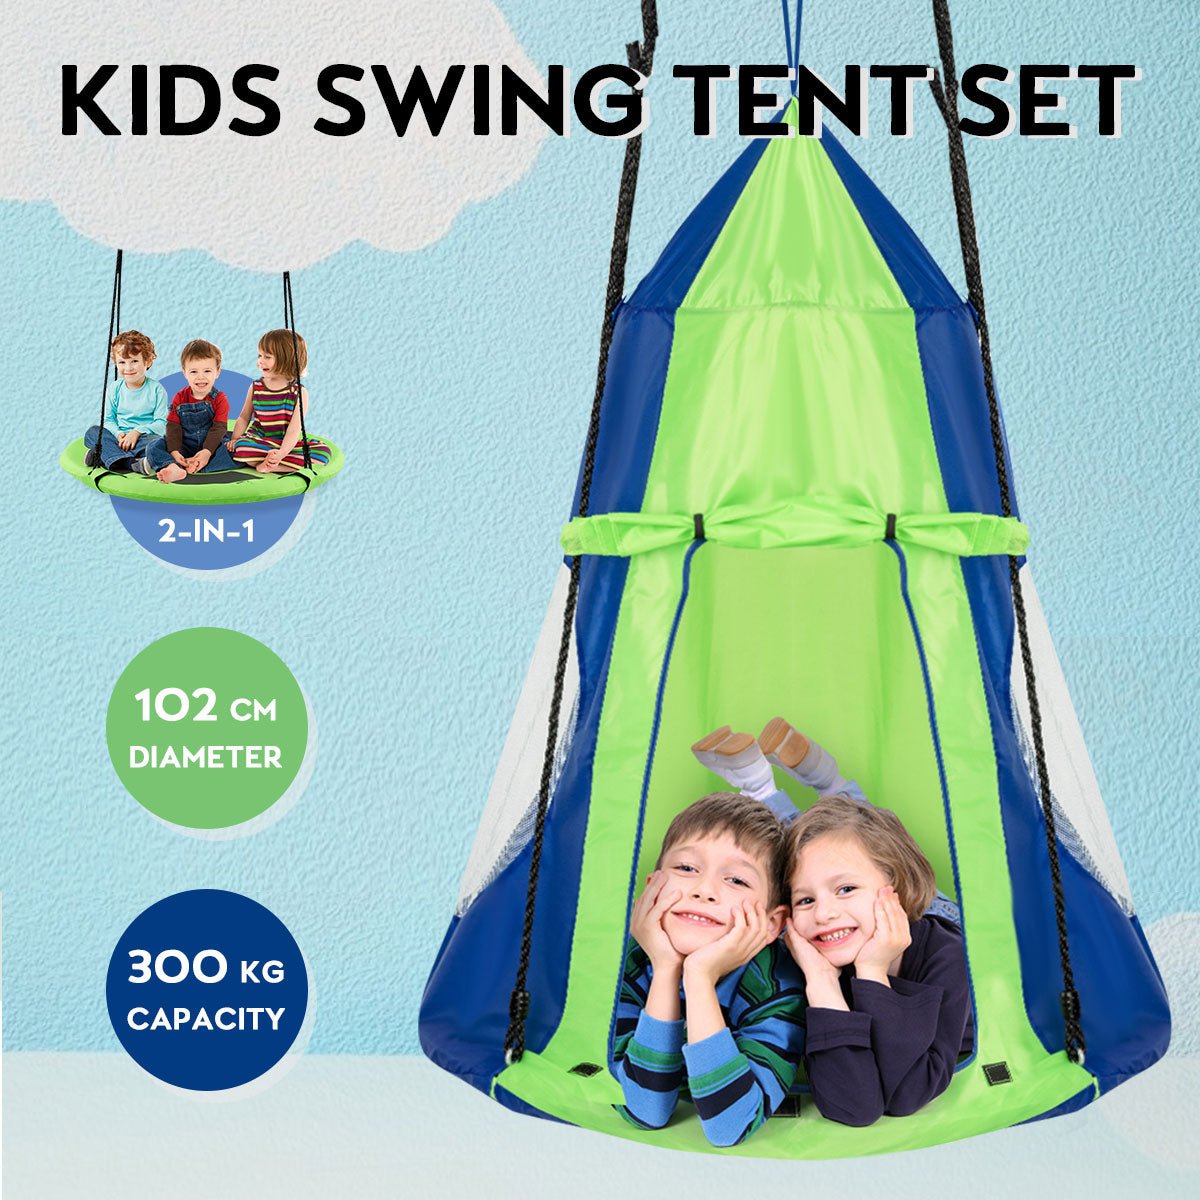 Imagination Soars with Our 2 in 1 Tree Tent Swing Set